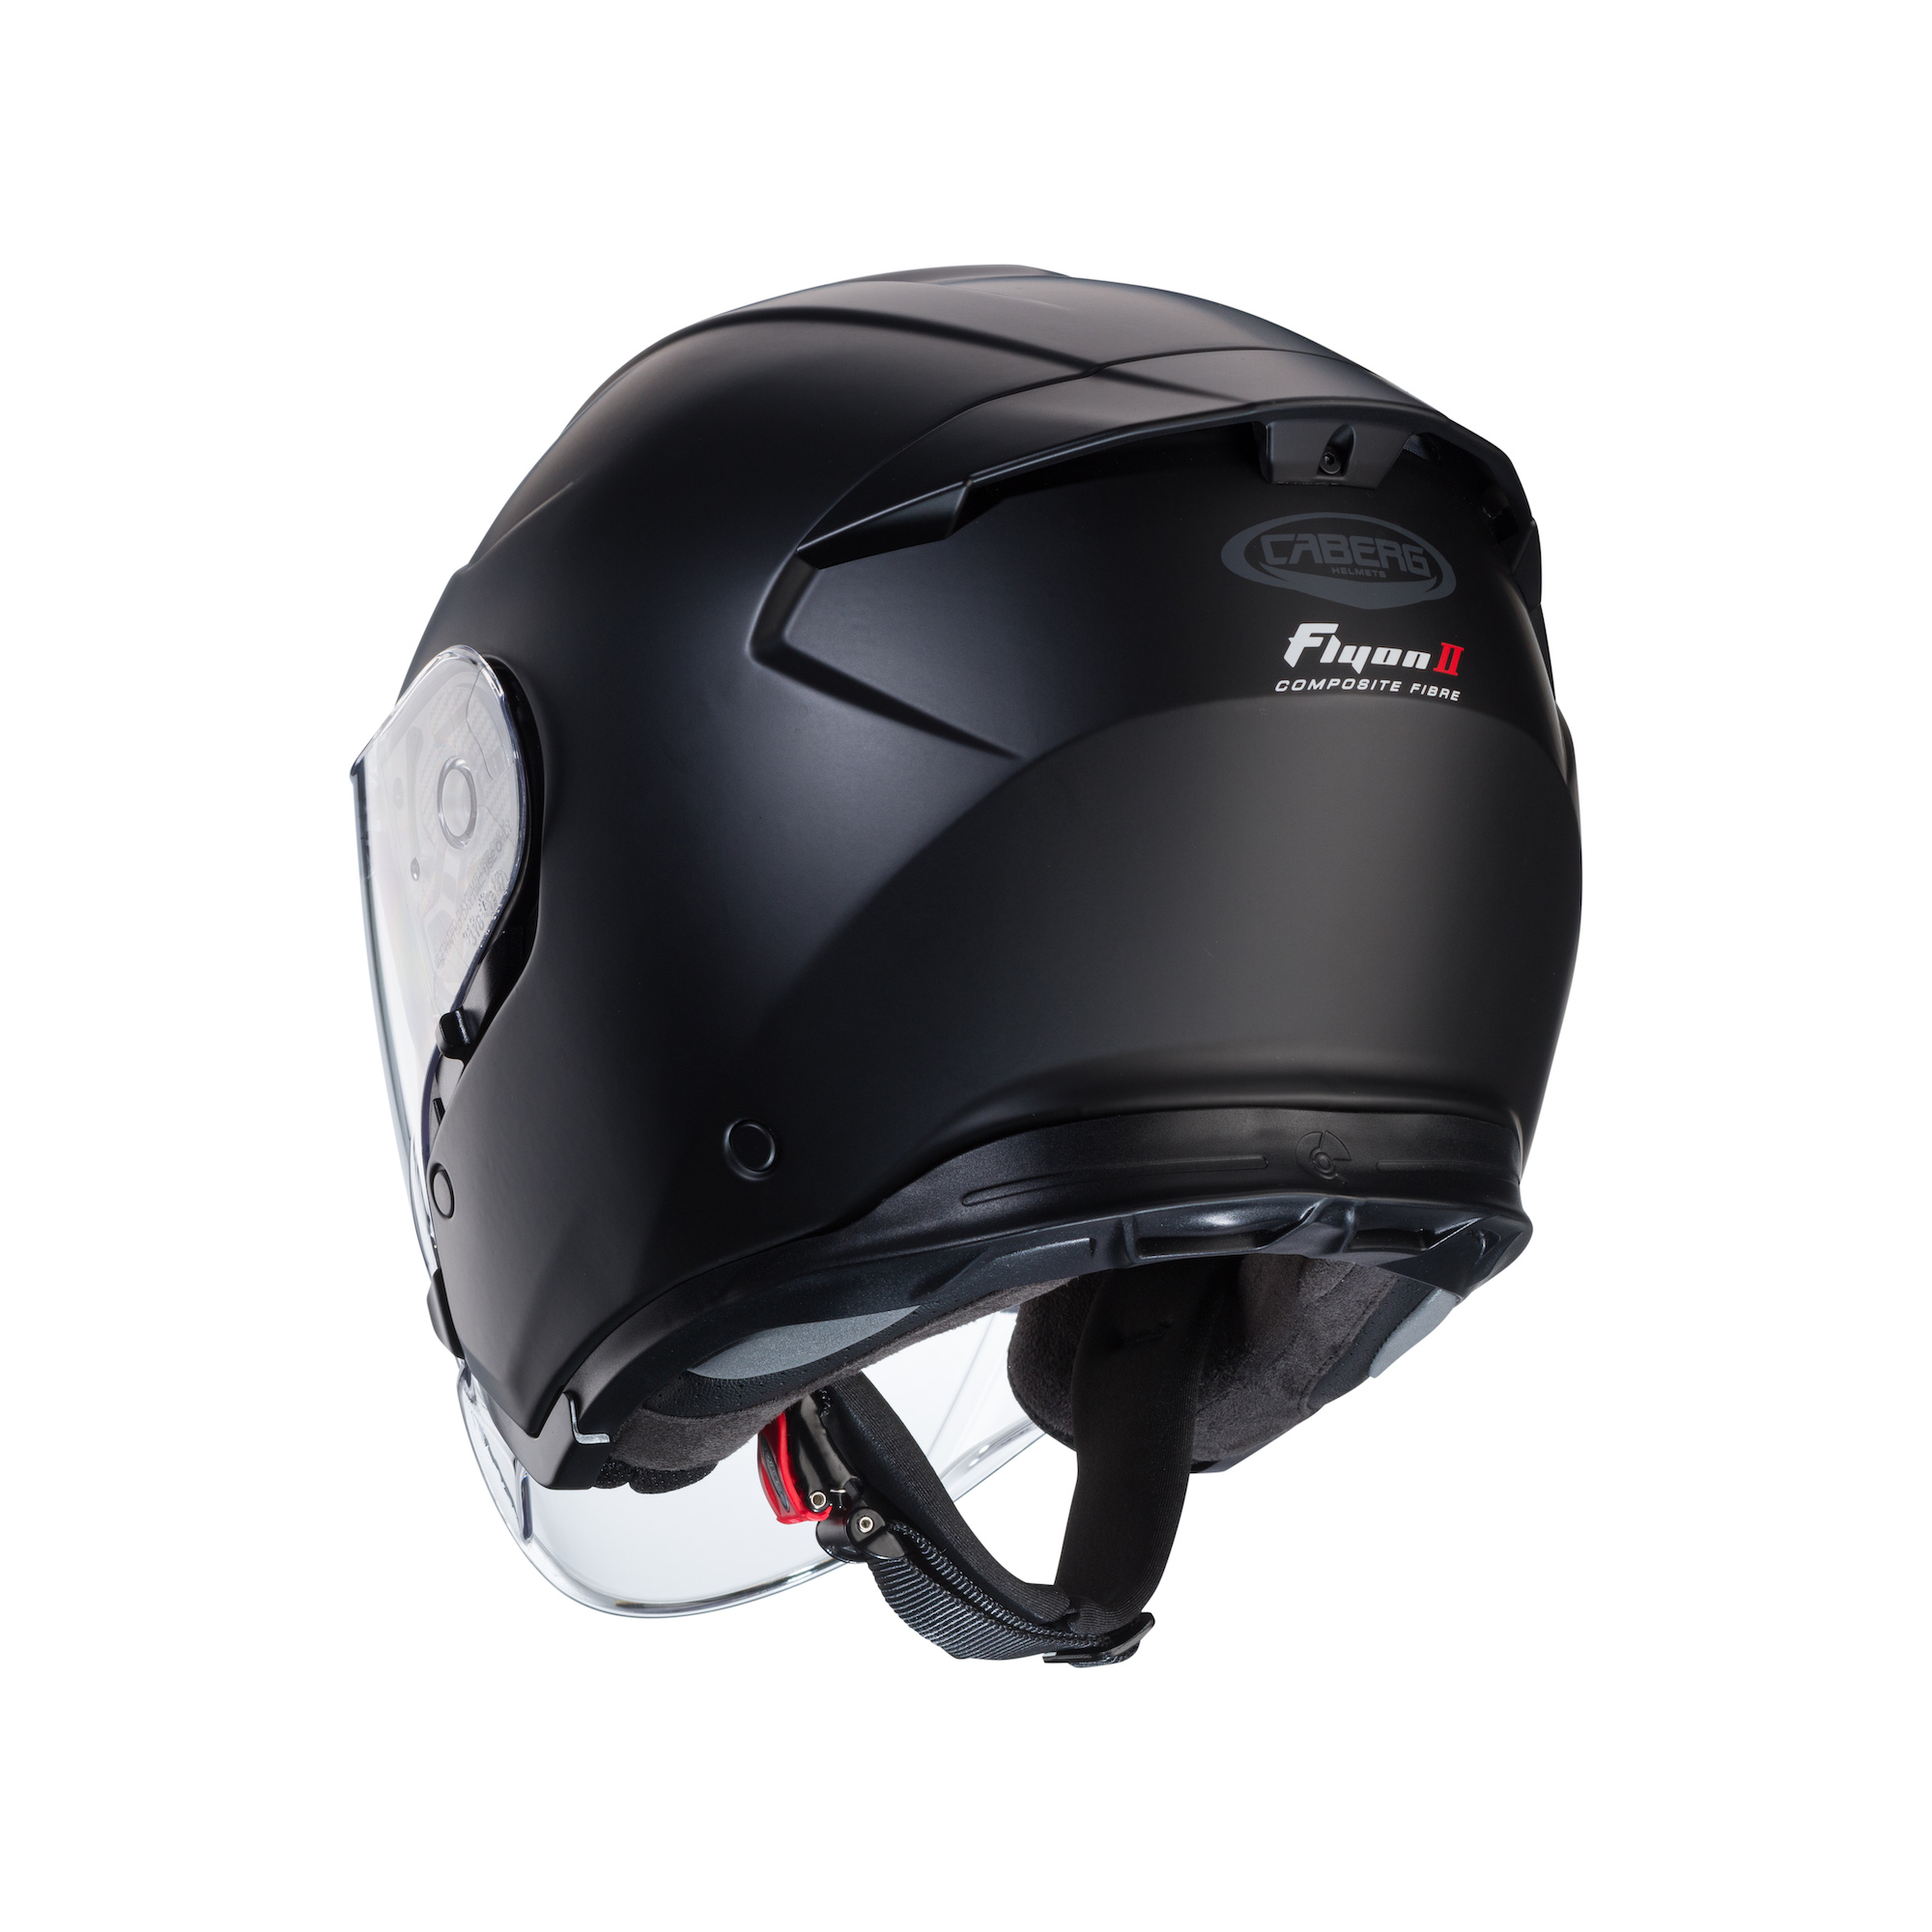 Caberg's newest Jet helmet, the FLYON II. Media sourced from Caberg's press release.